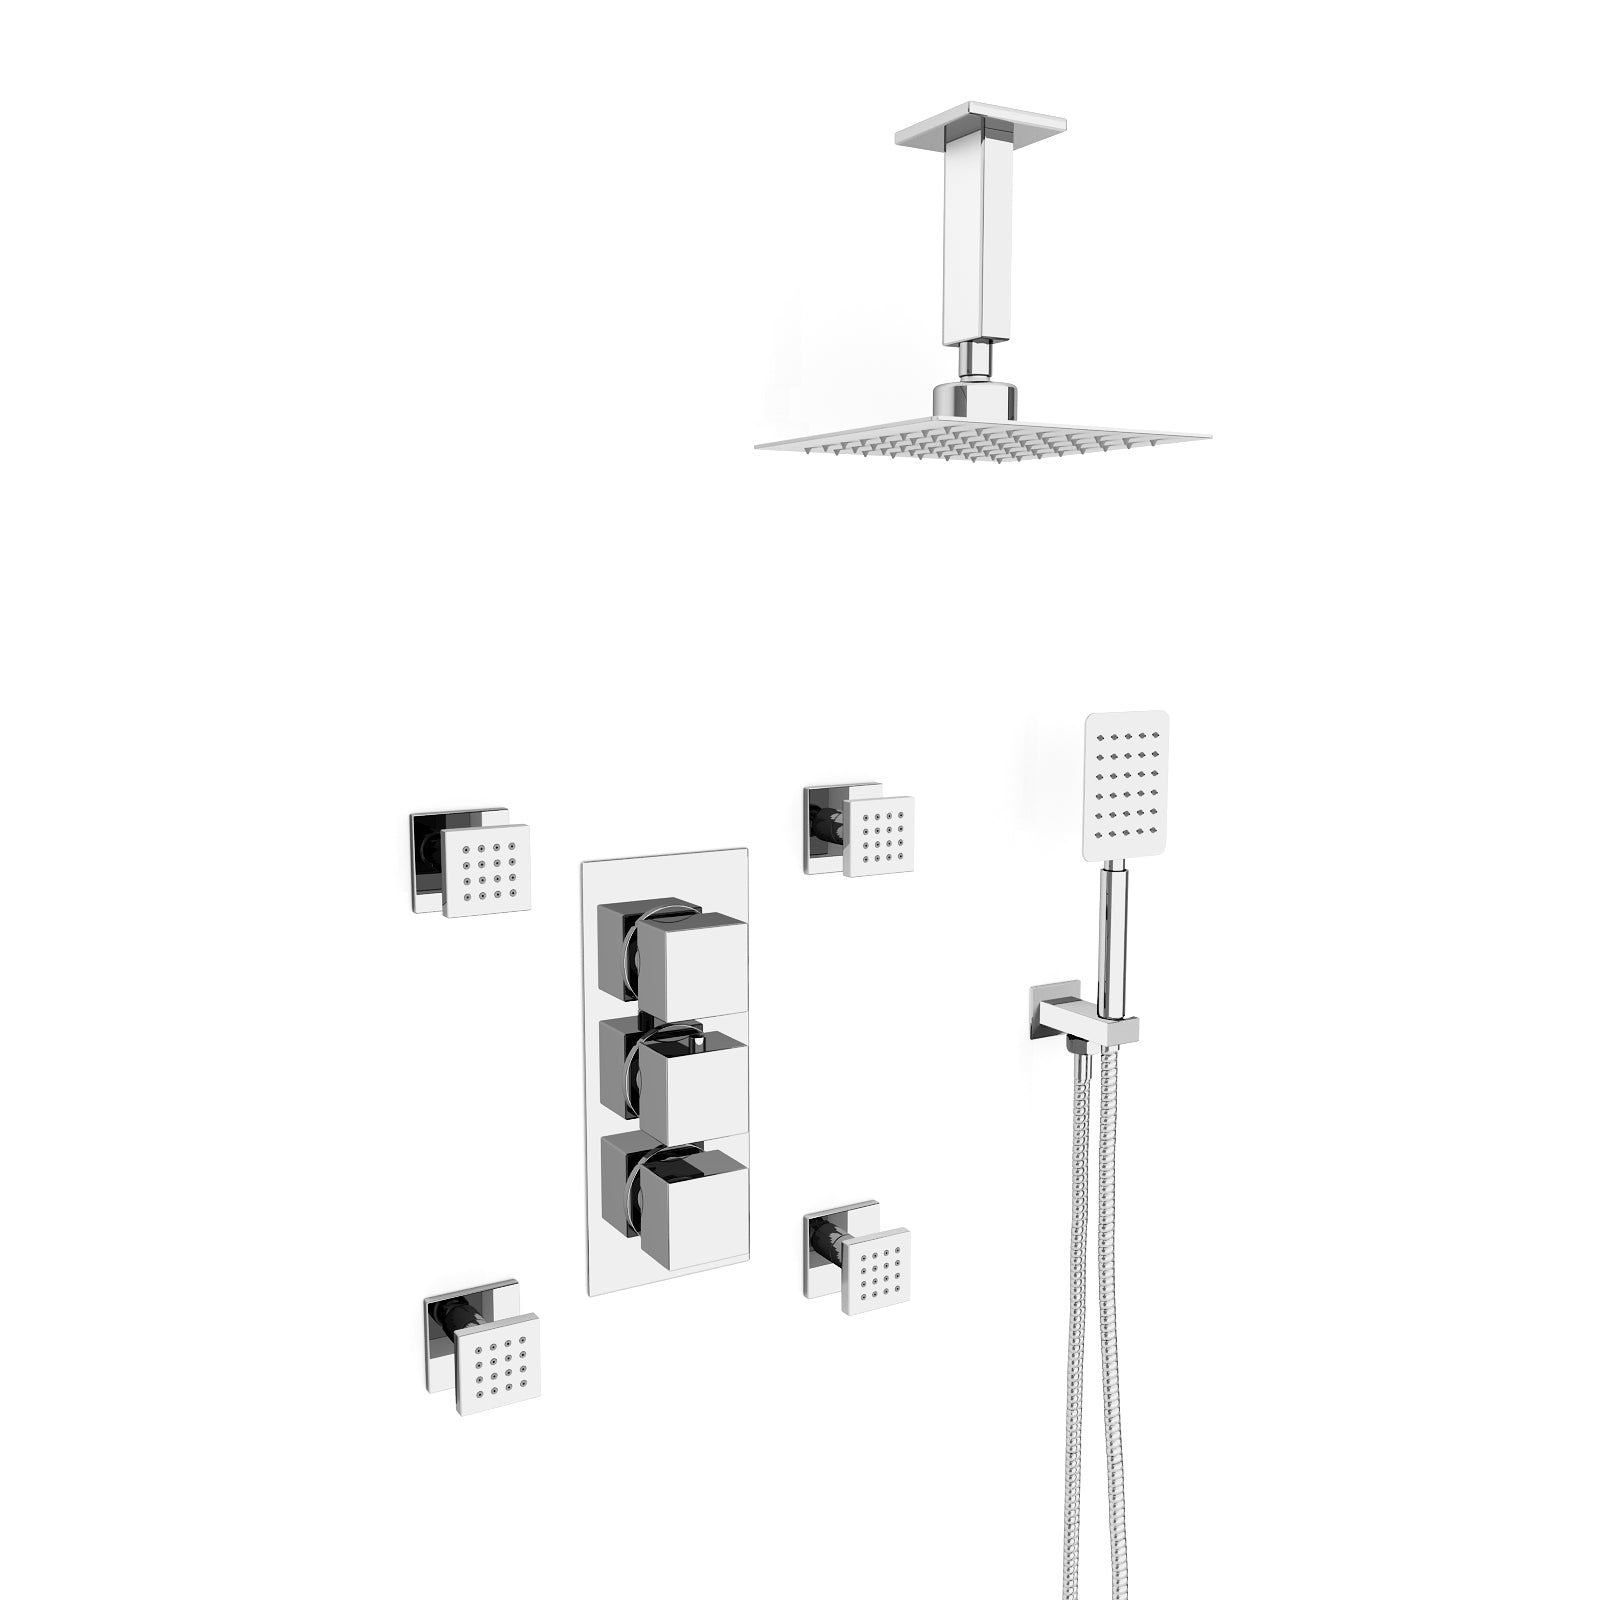 Olive Square 3 Way Concealed Thermostatic Shower Mixer Valve, Ceiling Shower Head, Handset, 4x Body Jets Set Chrome